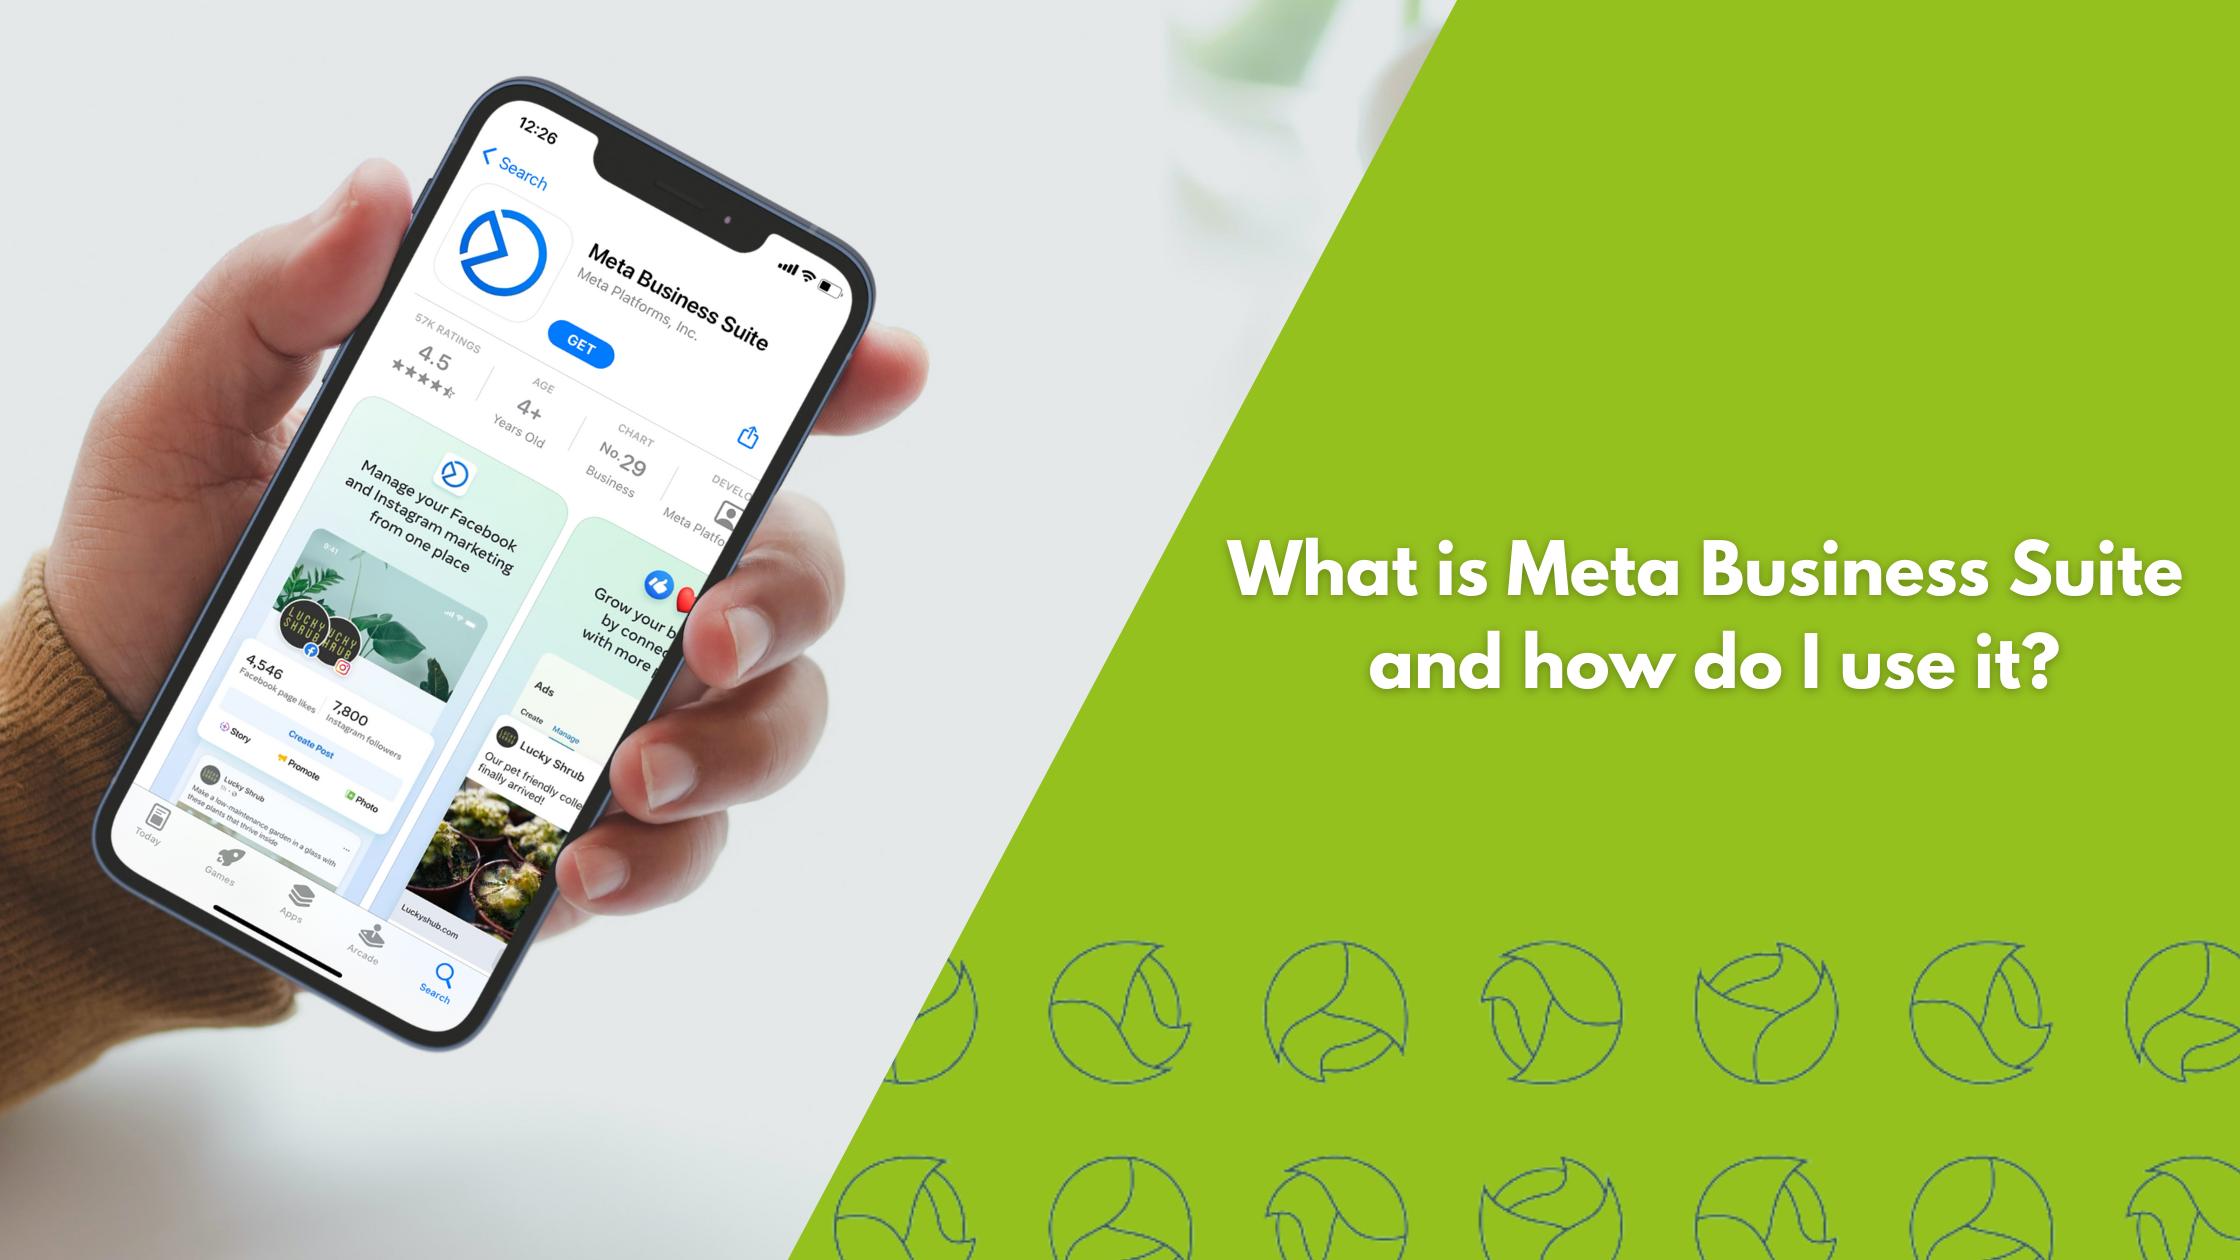 What Is Meta Business Suite And How Do I Use It?